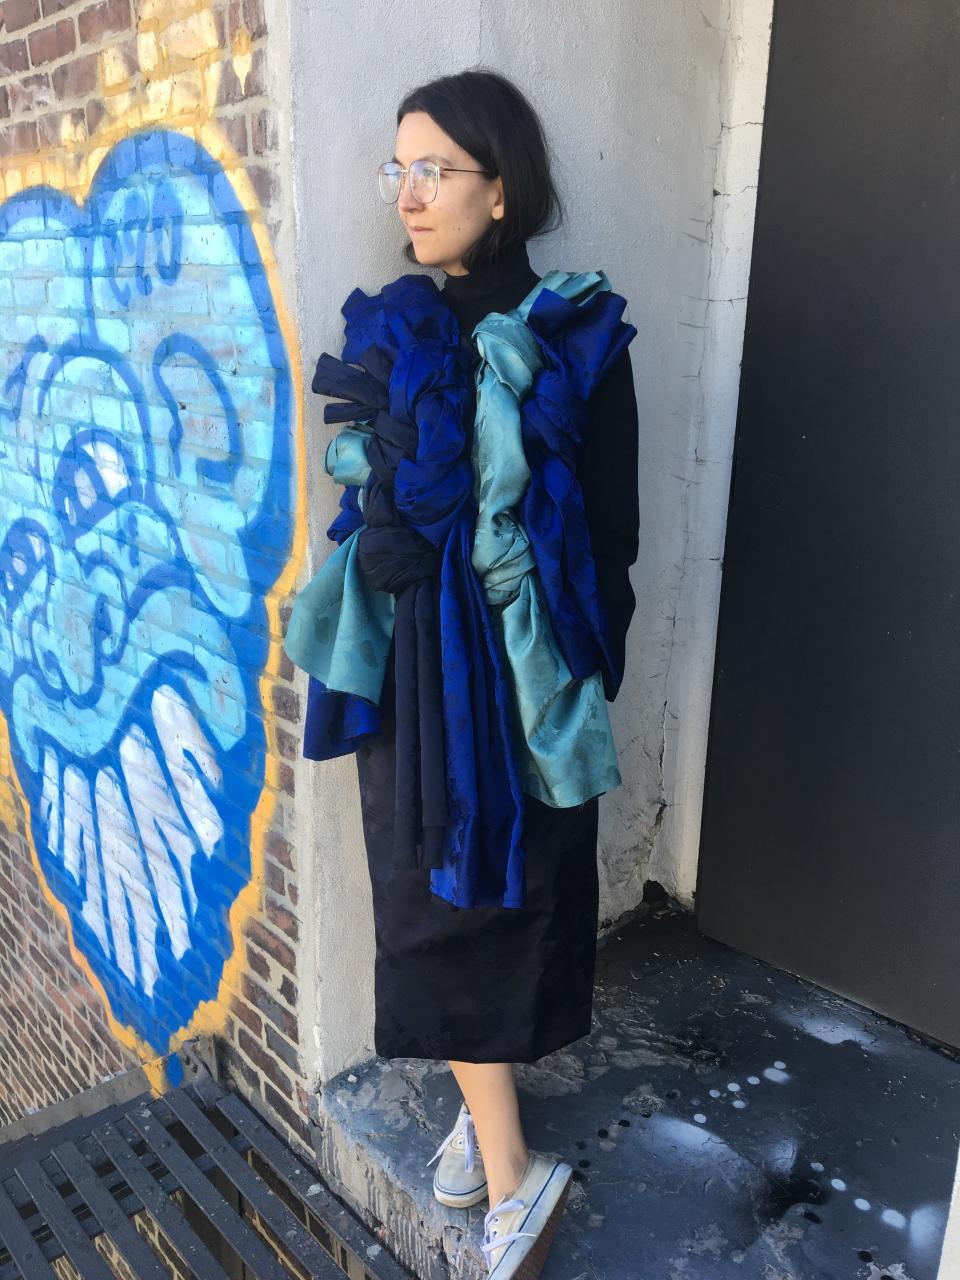 <p><b>Gia Kuan, publicist</b></p><p>“Wearing Comme des Garçons makes me feel happy, liberated. I started wearing CDG shortly after high school and since then I’ve been hooked—each piece is a prized possession and like art, sometimes finding an archival piece is like discovering a piece of treasure.”</p>